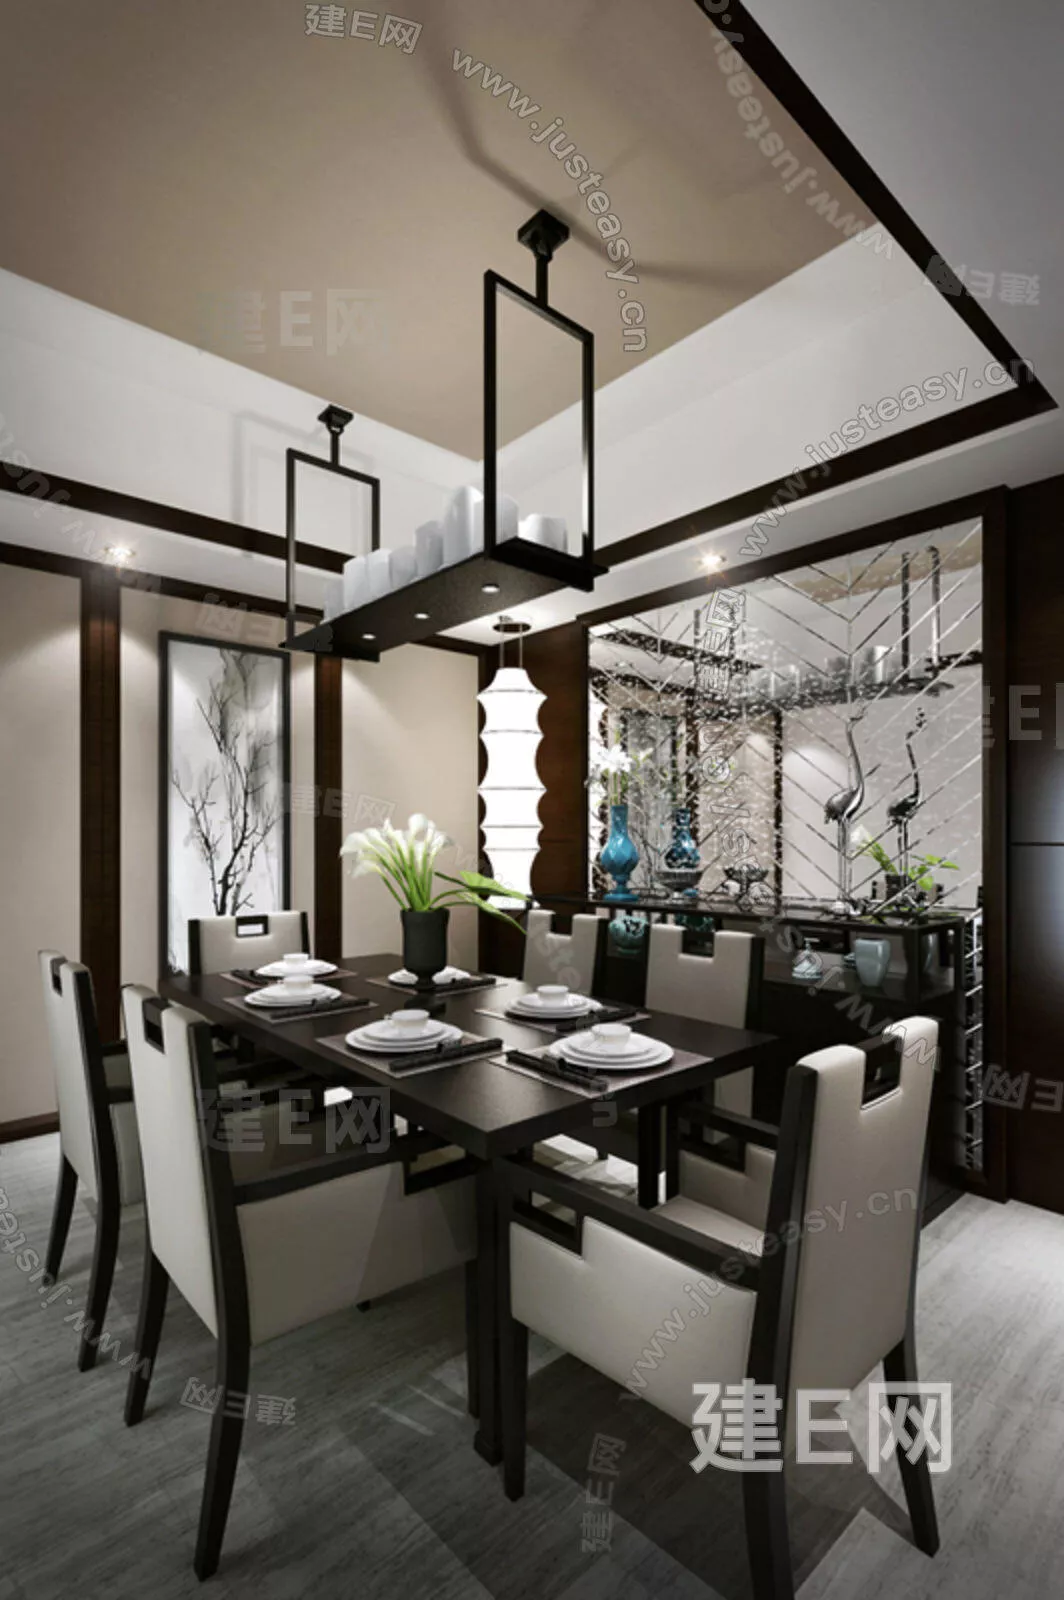 CHINESE DINING ROOM - SKETCHUP 3D SCENE - ENSCAPE - 112872748